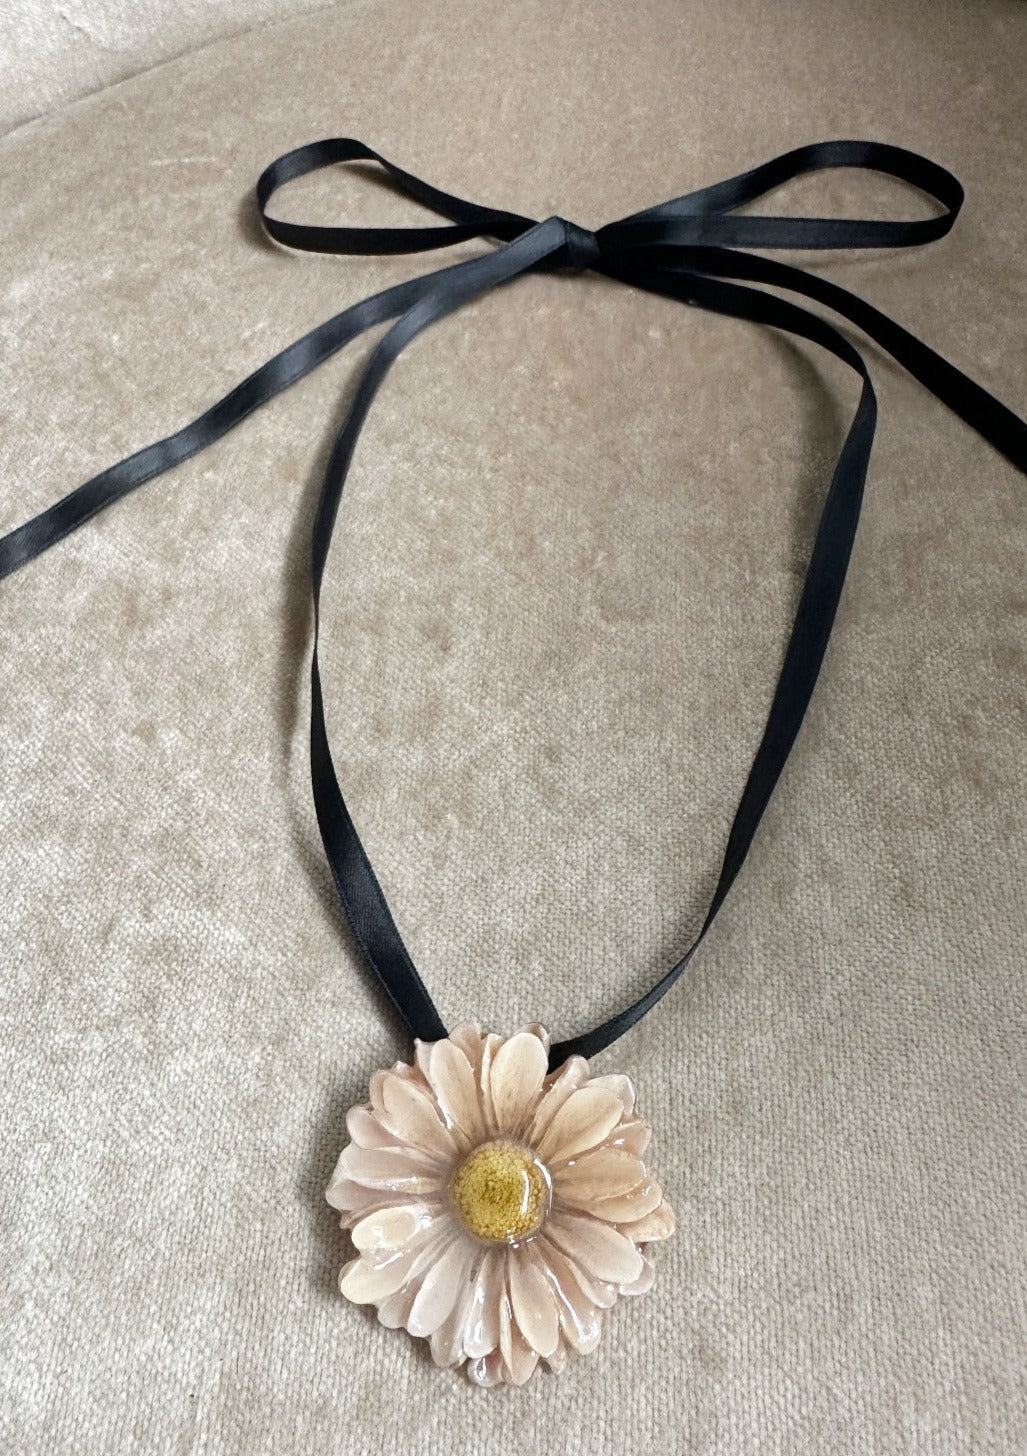 Ivory daisy pendant diped in resin suspended from a black satin ribbon.